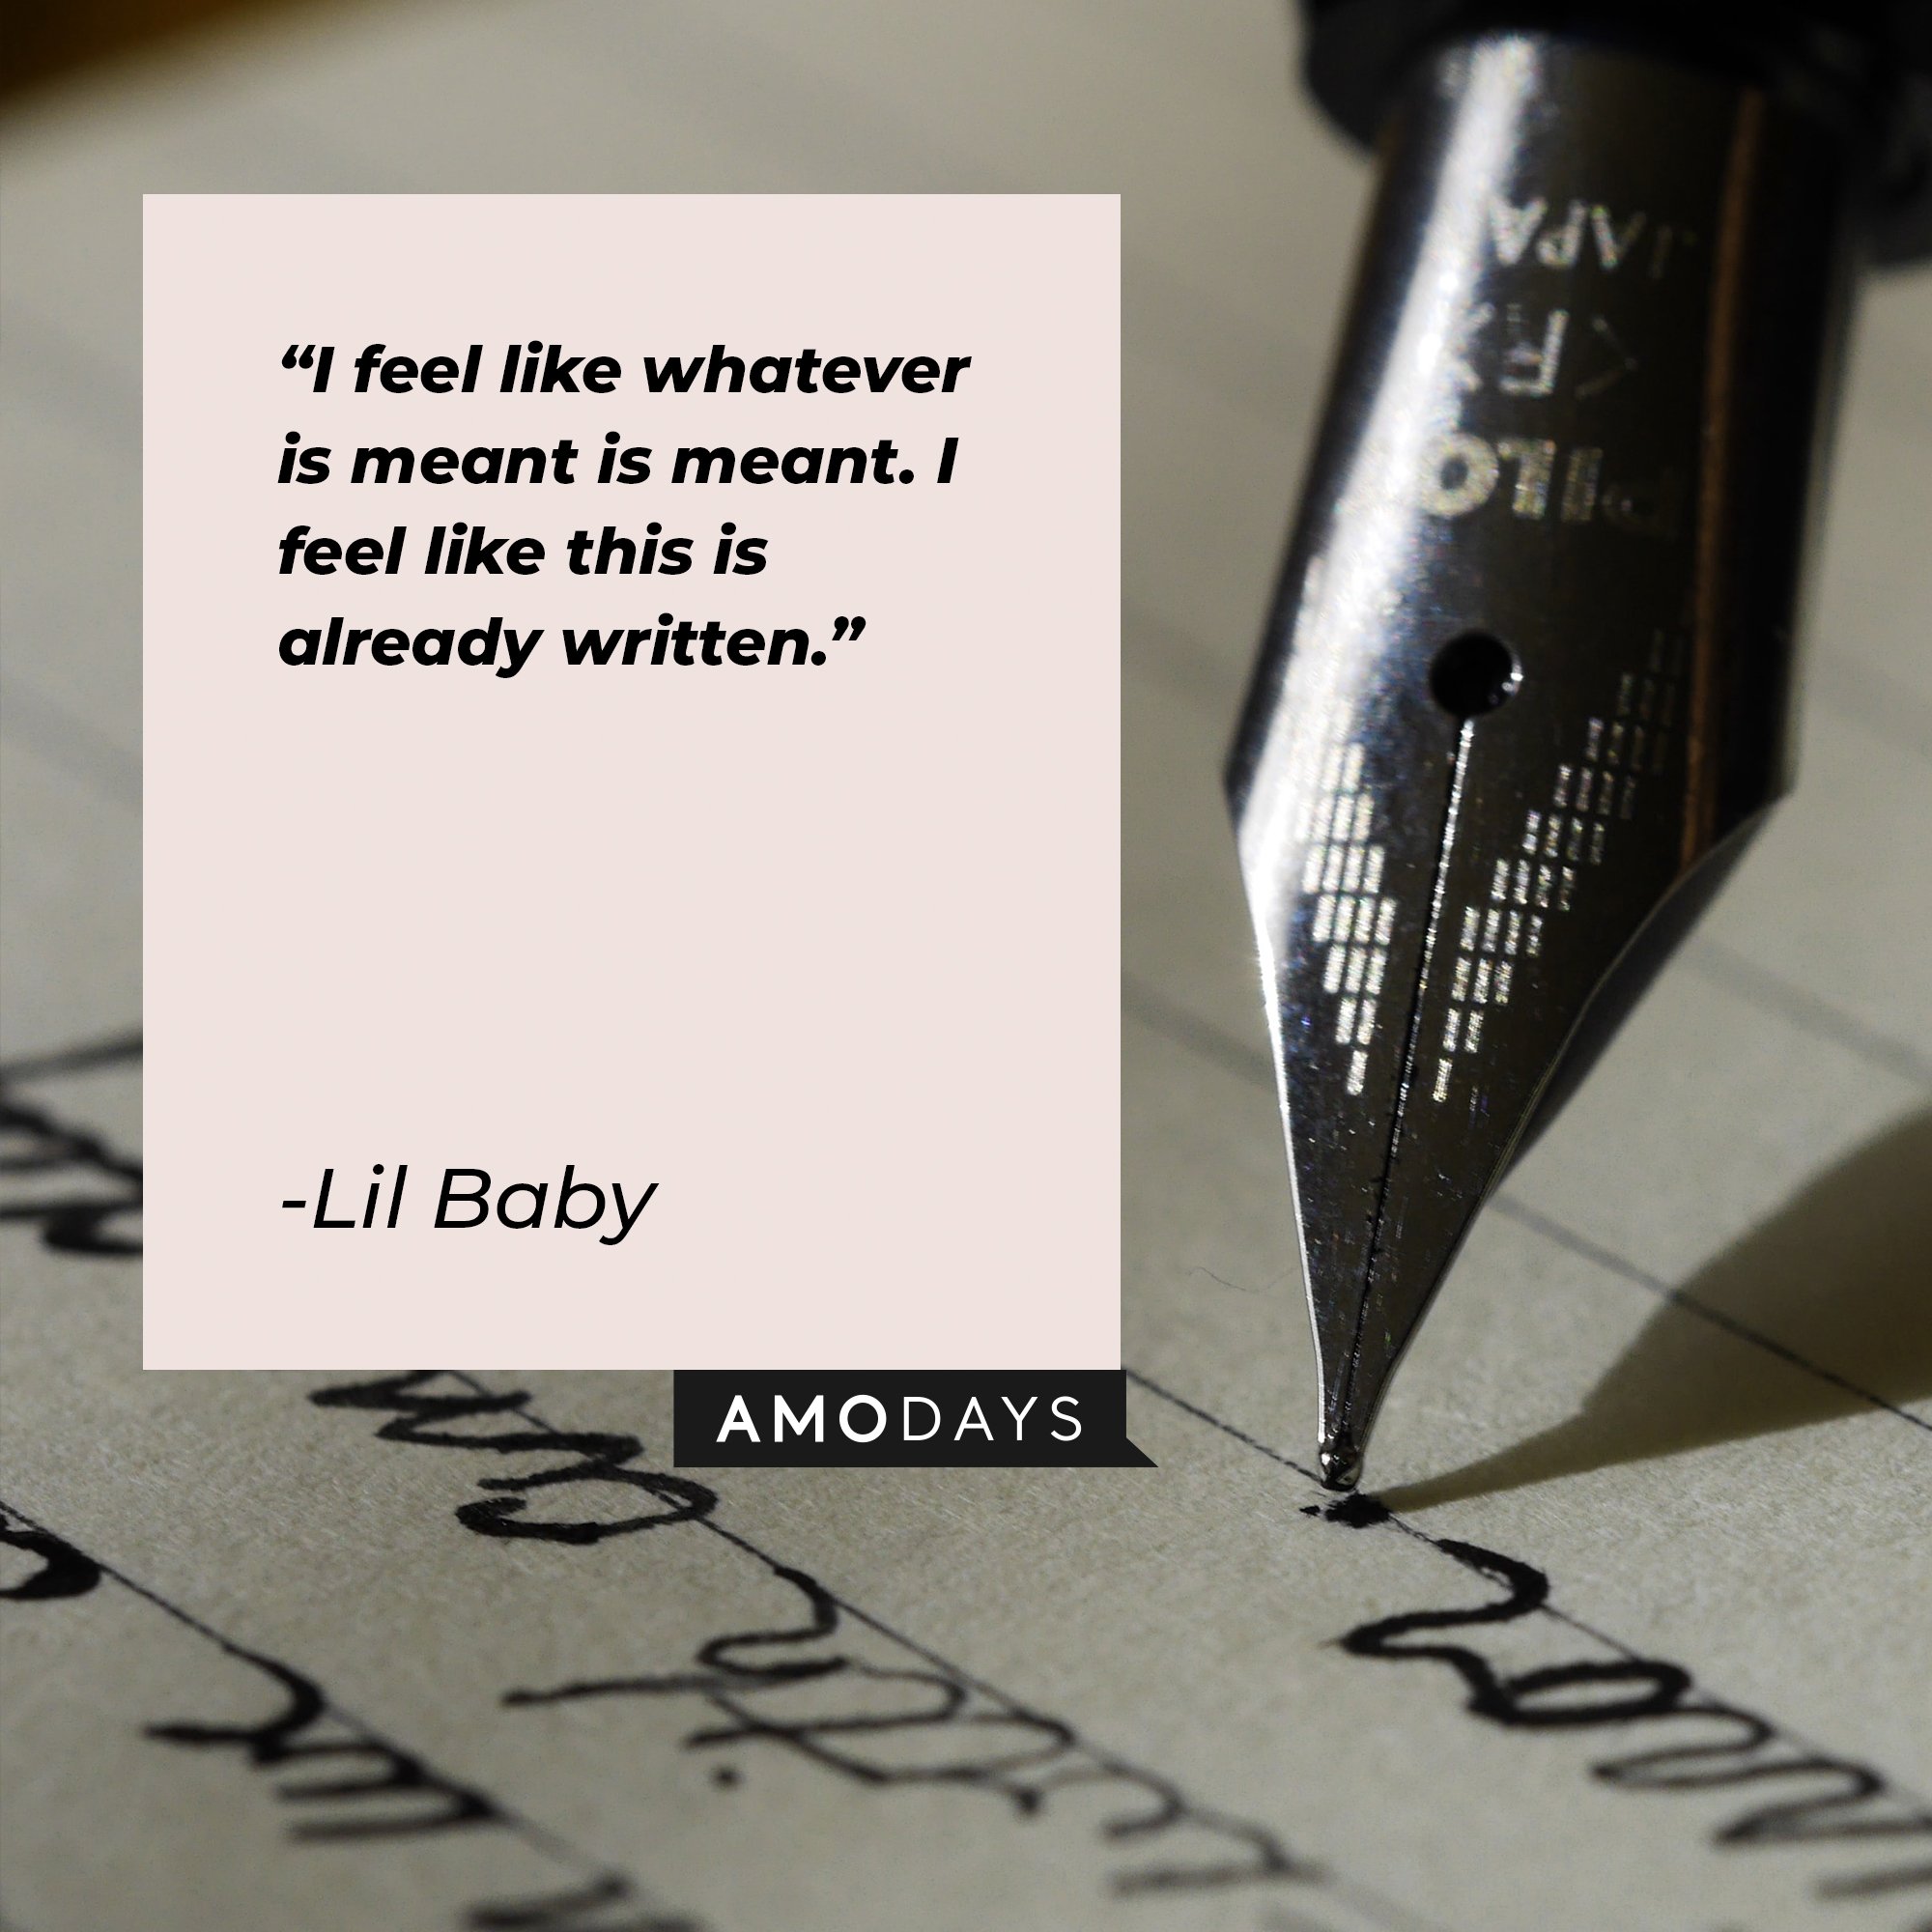 Lil Baby’s quote: "I feel like whatever is meant is meant. I feel like this is already written." | Image: AmoDays